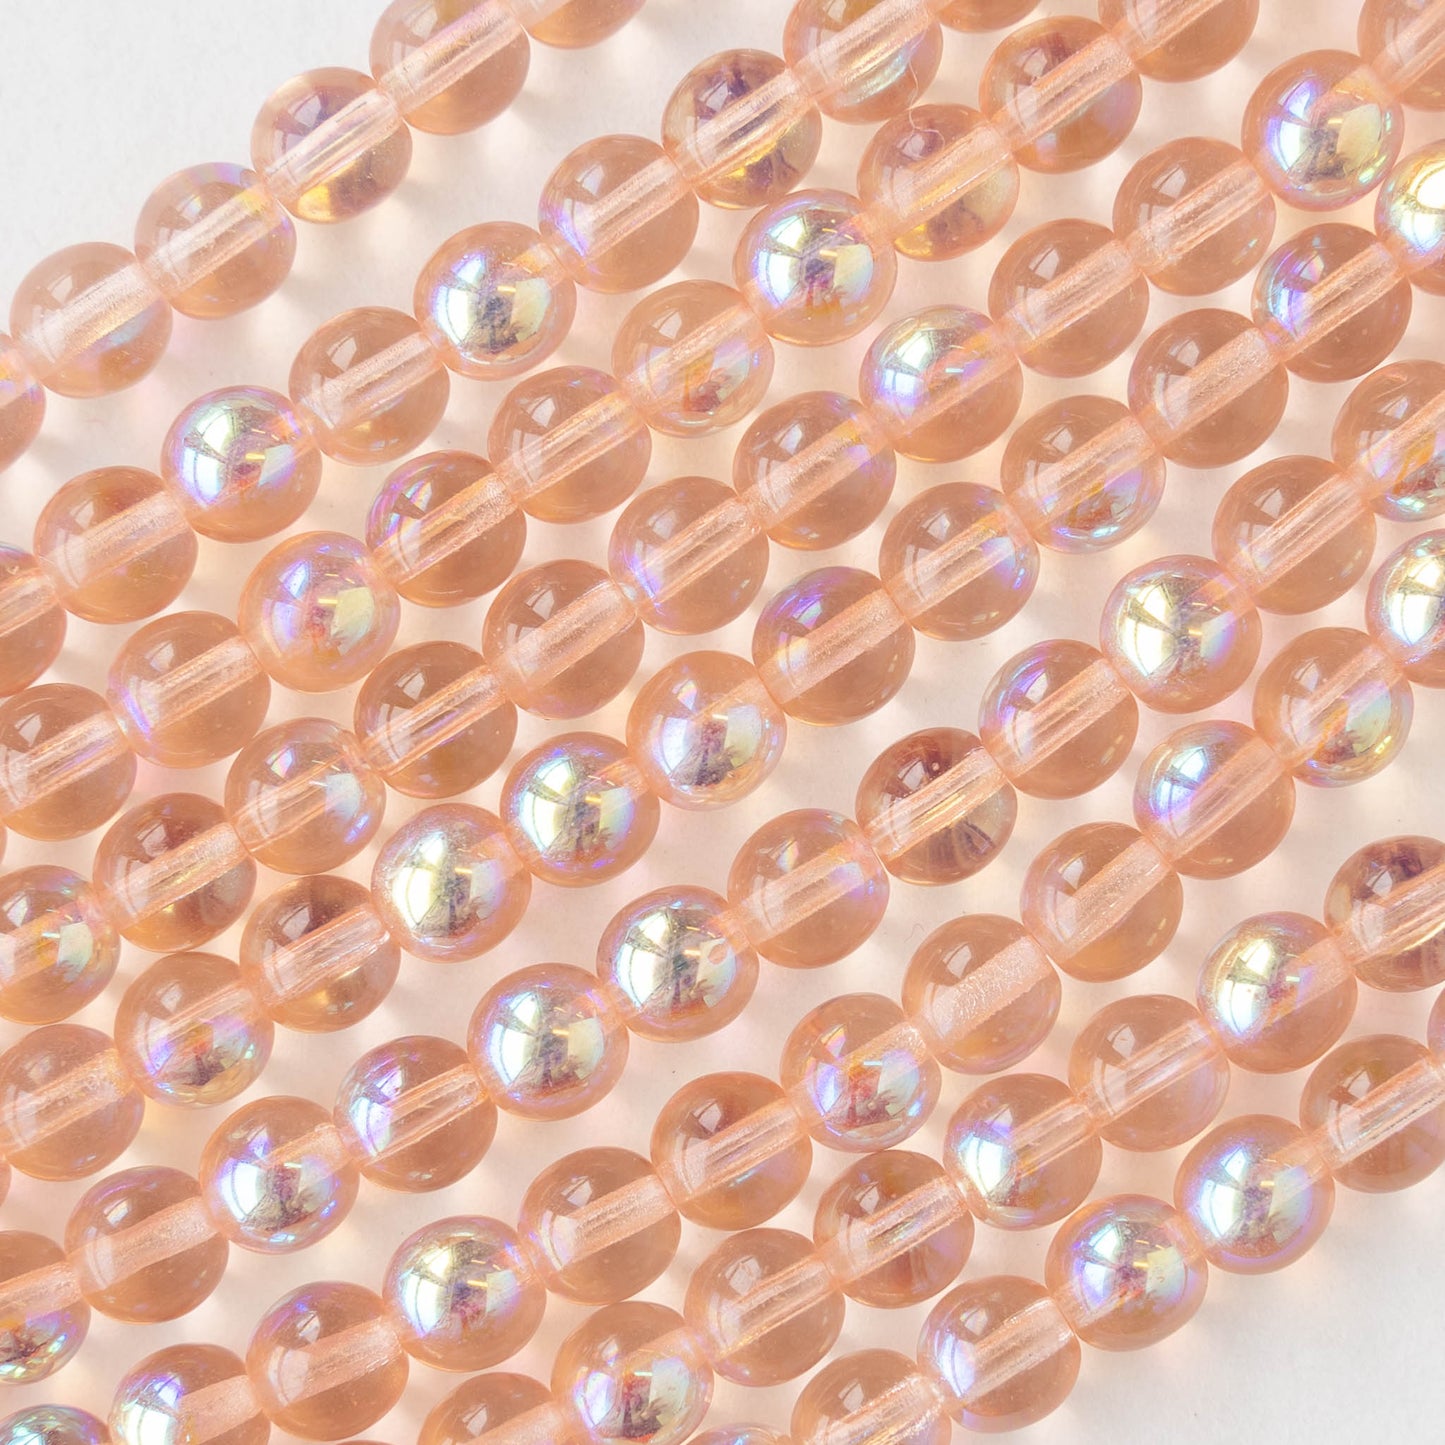 5mm Round Glass Beads - Rosaline Shimmer AB - 50 Beads